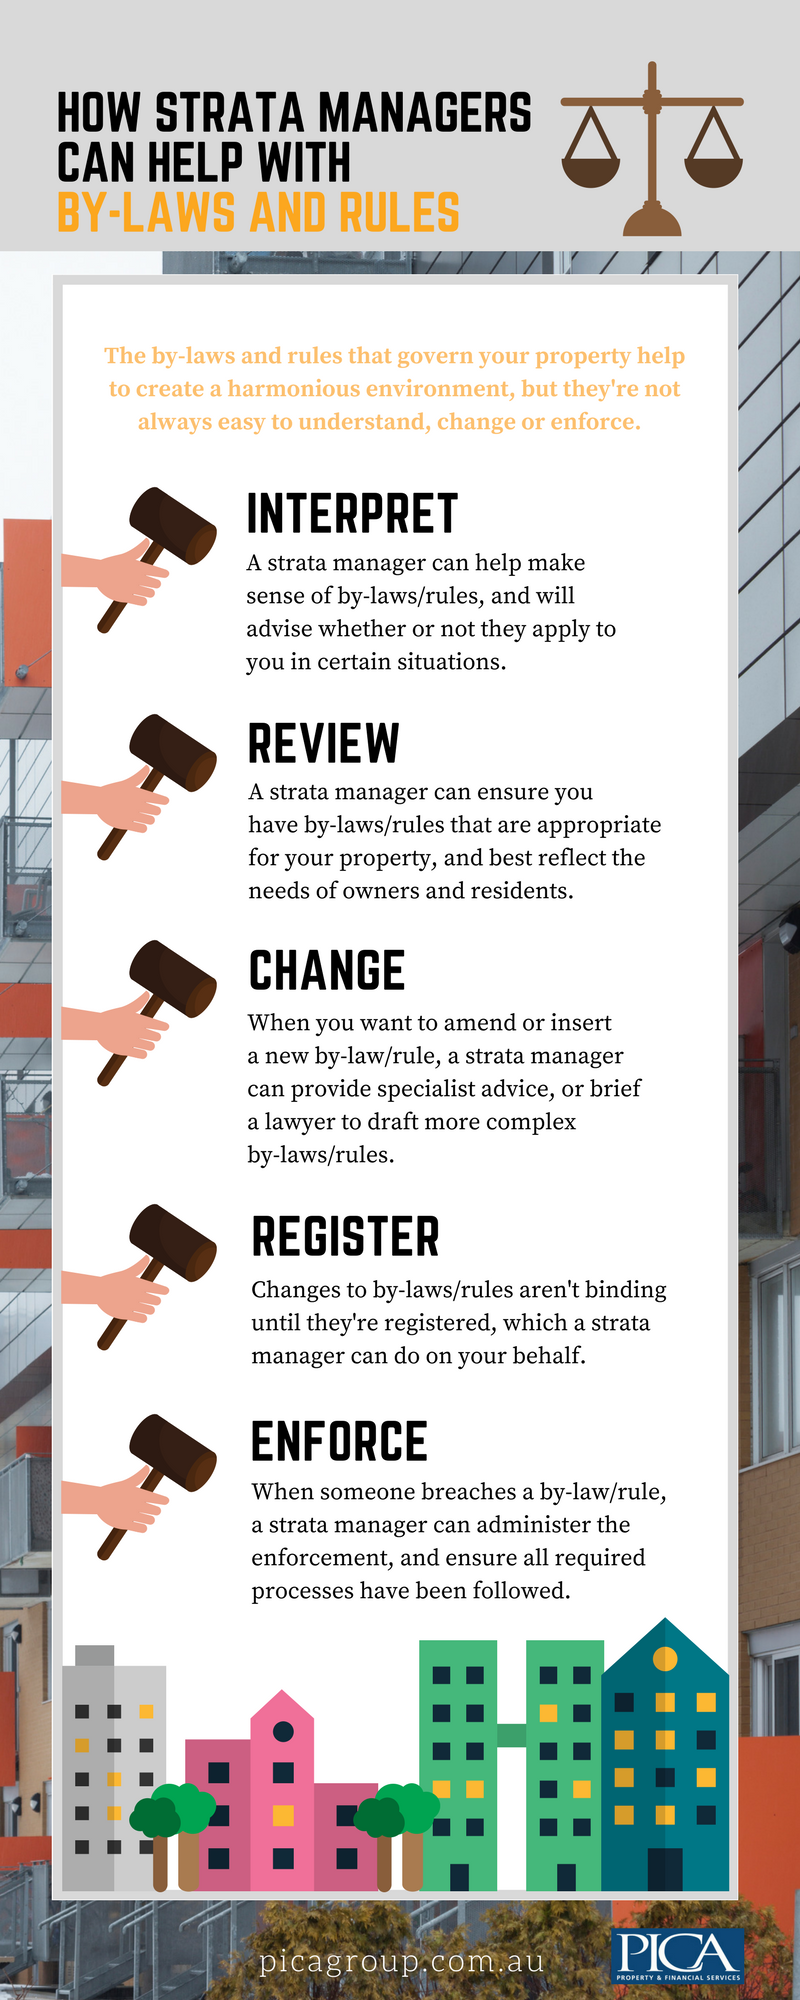 How strata managers can help with by-laws and rules